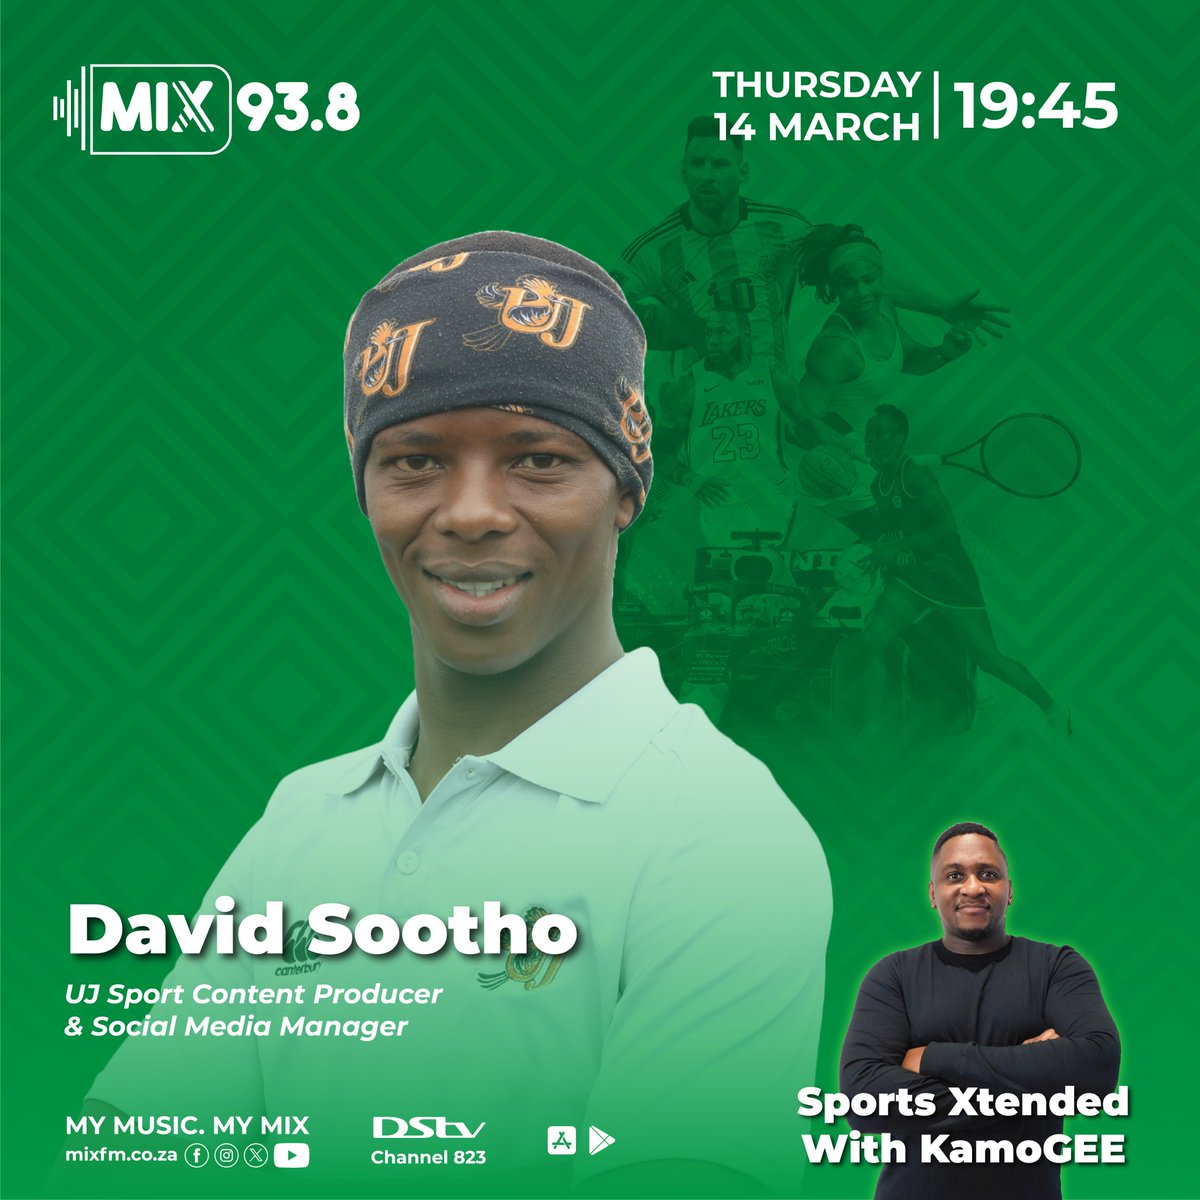 Join @OG_KamoGEE on Sports Xtended from 7-8pm. Tune in for exclusive interviews and insights from the world of sports.! -Tonight's Guests: SA Under 21 Netball Team Coach, Precious Mthembu at 7:30 pm -UJ Sport Content Producer & Social Media Manager, David Sootho at 7:45 pm